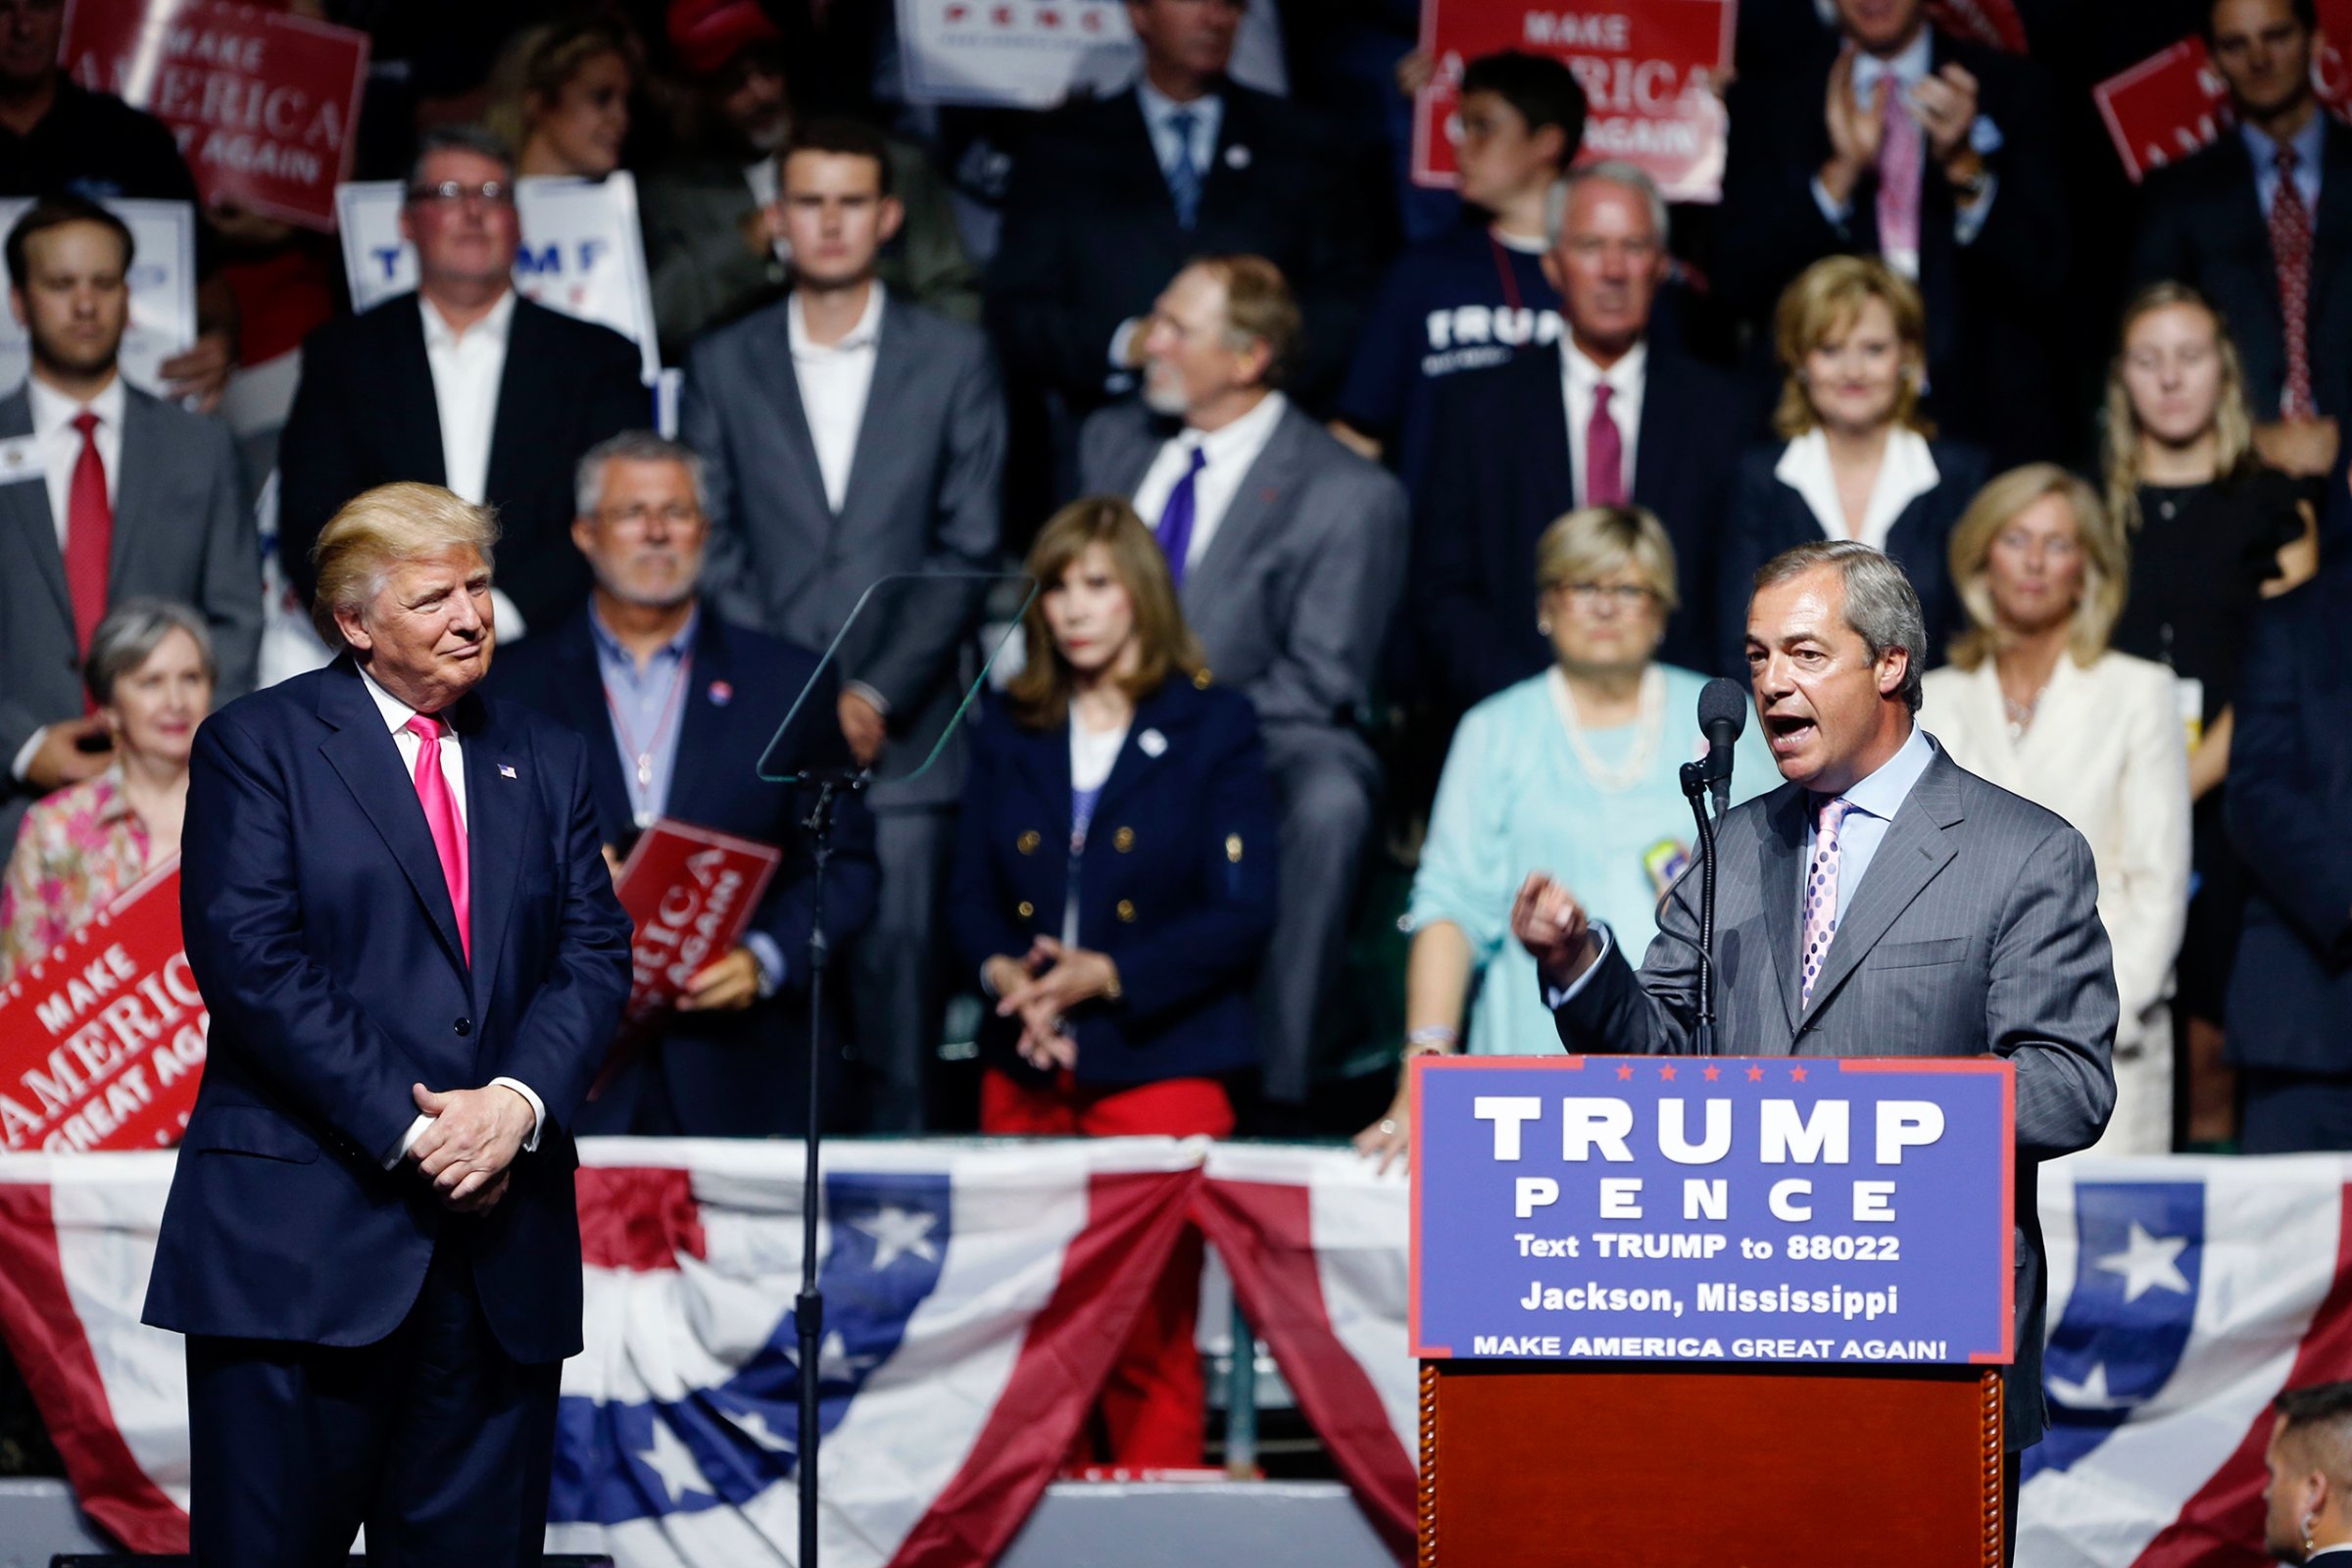 Nigel Farage, ex-leader of the British UKIP party, speaks as Republican presidential candidate Donald Trump listens at Trump's campaign rally in Jackson, Miss., on Aug. 24, 2016.